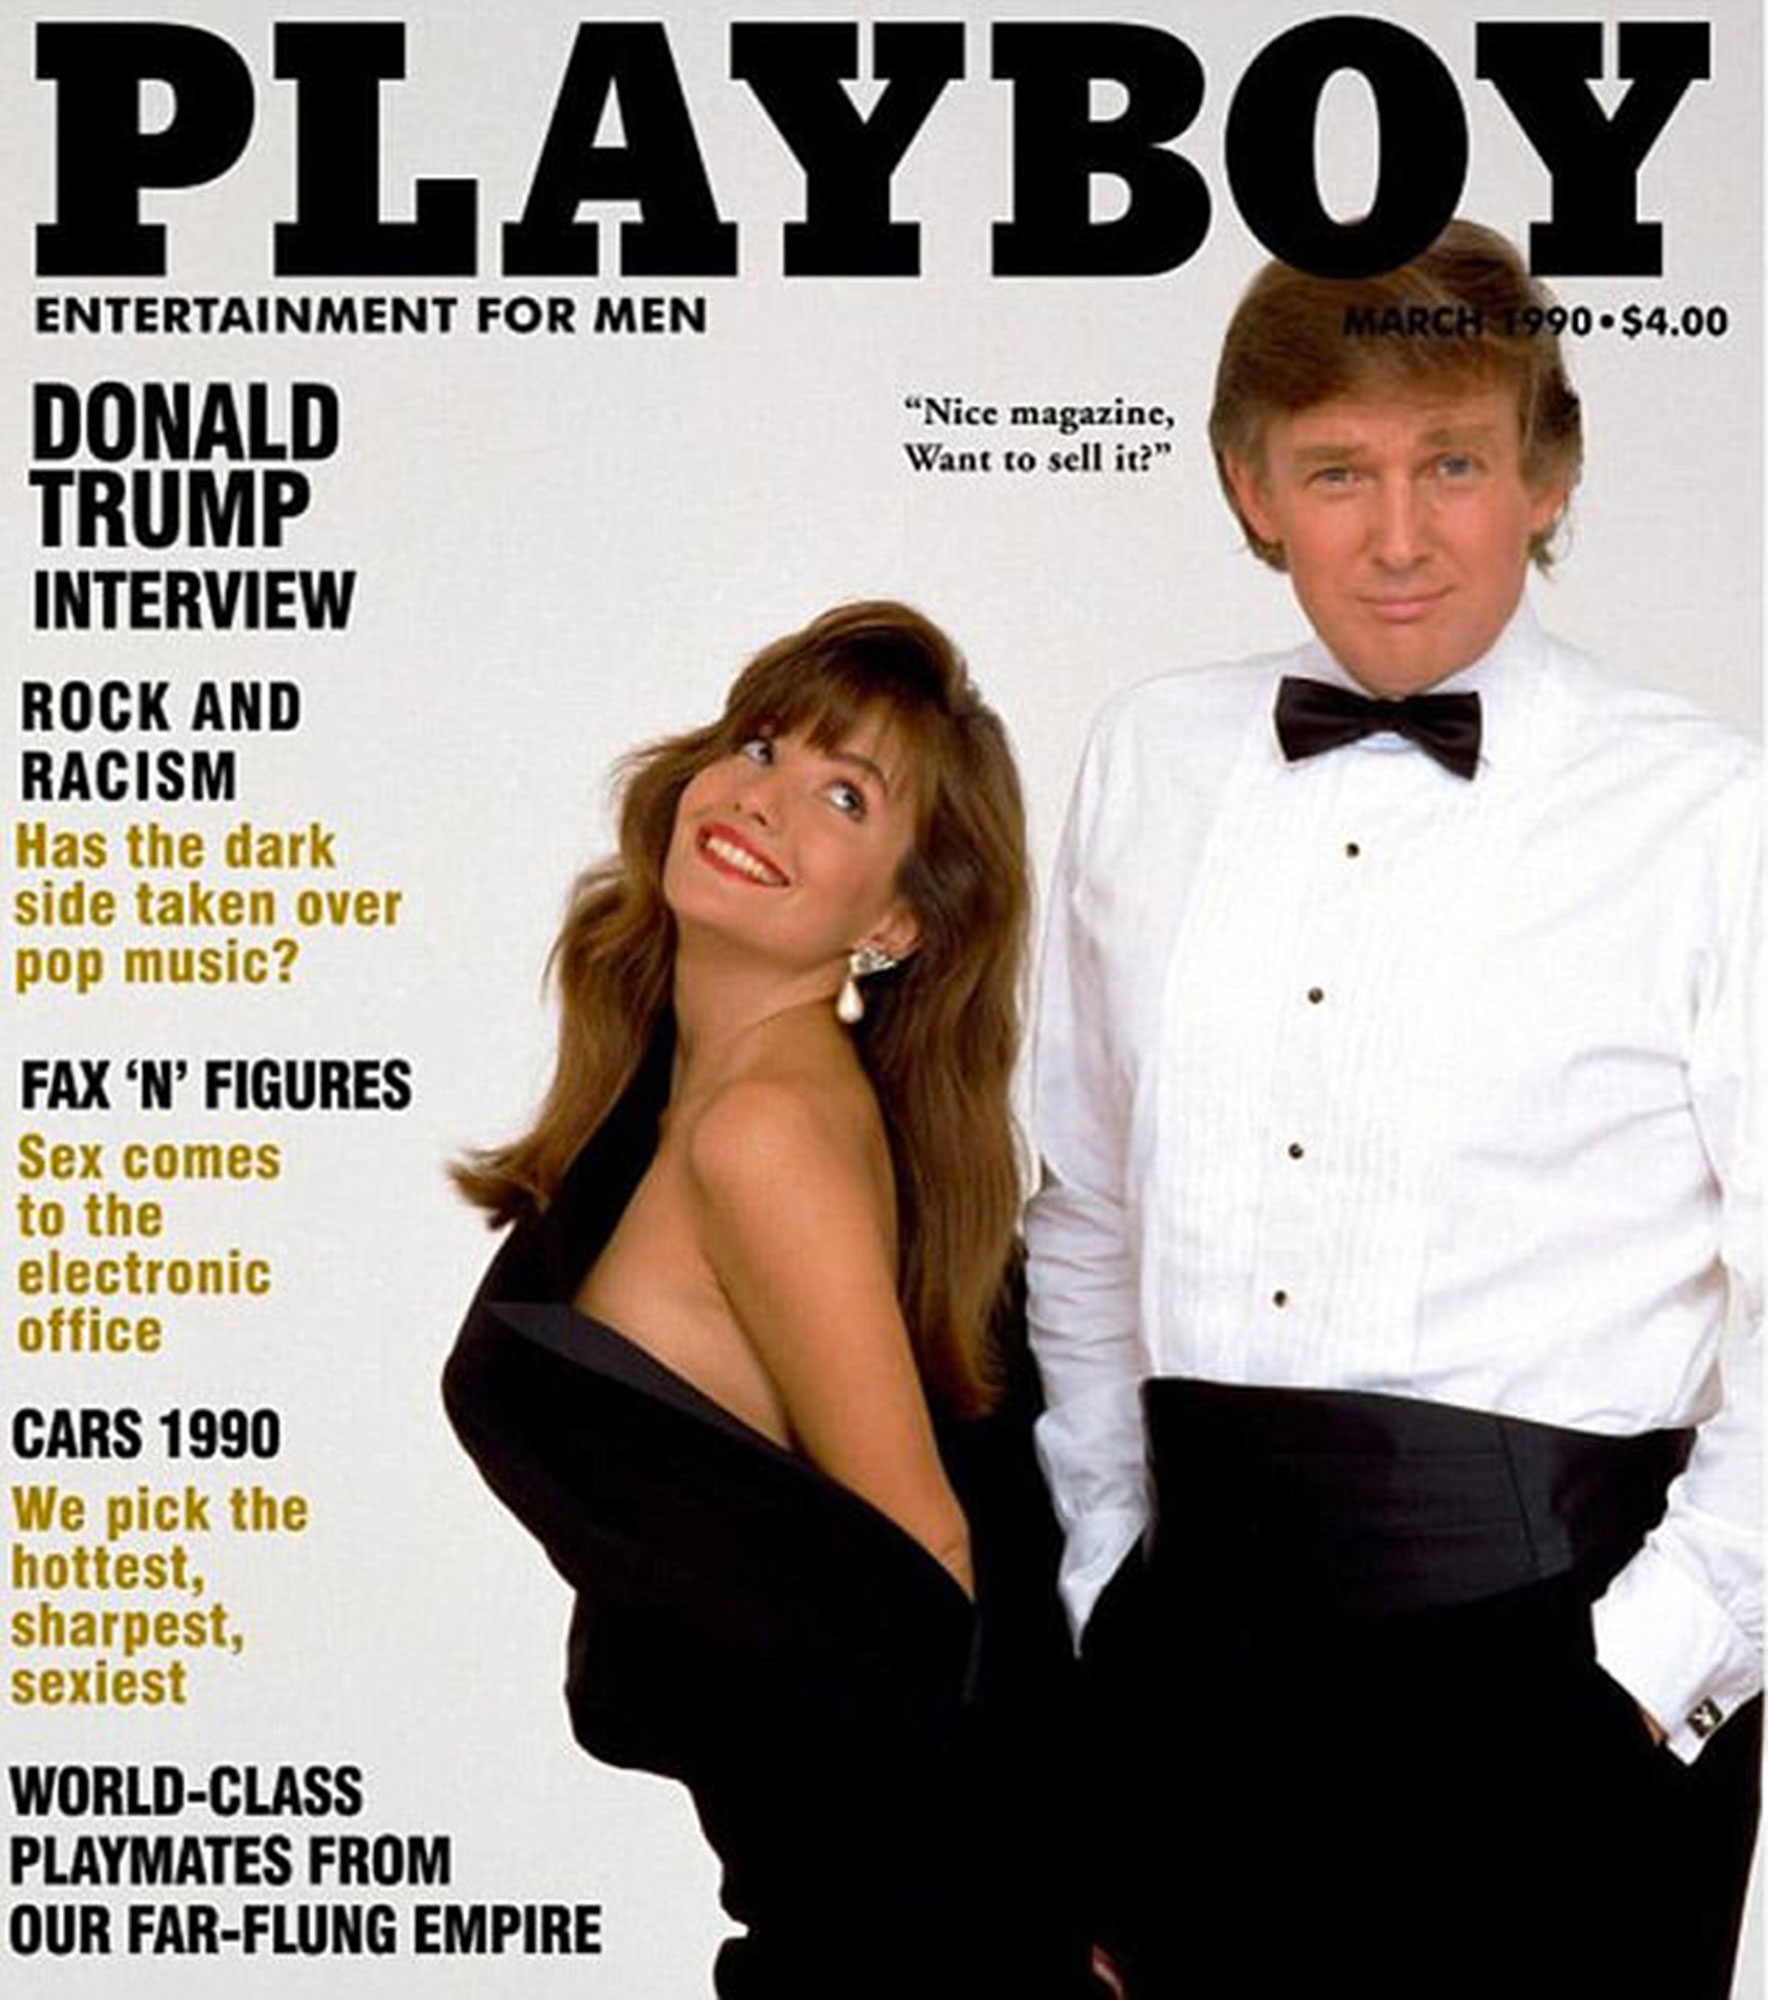 A cover of Playboy magazine.